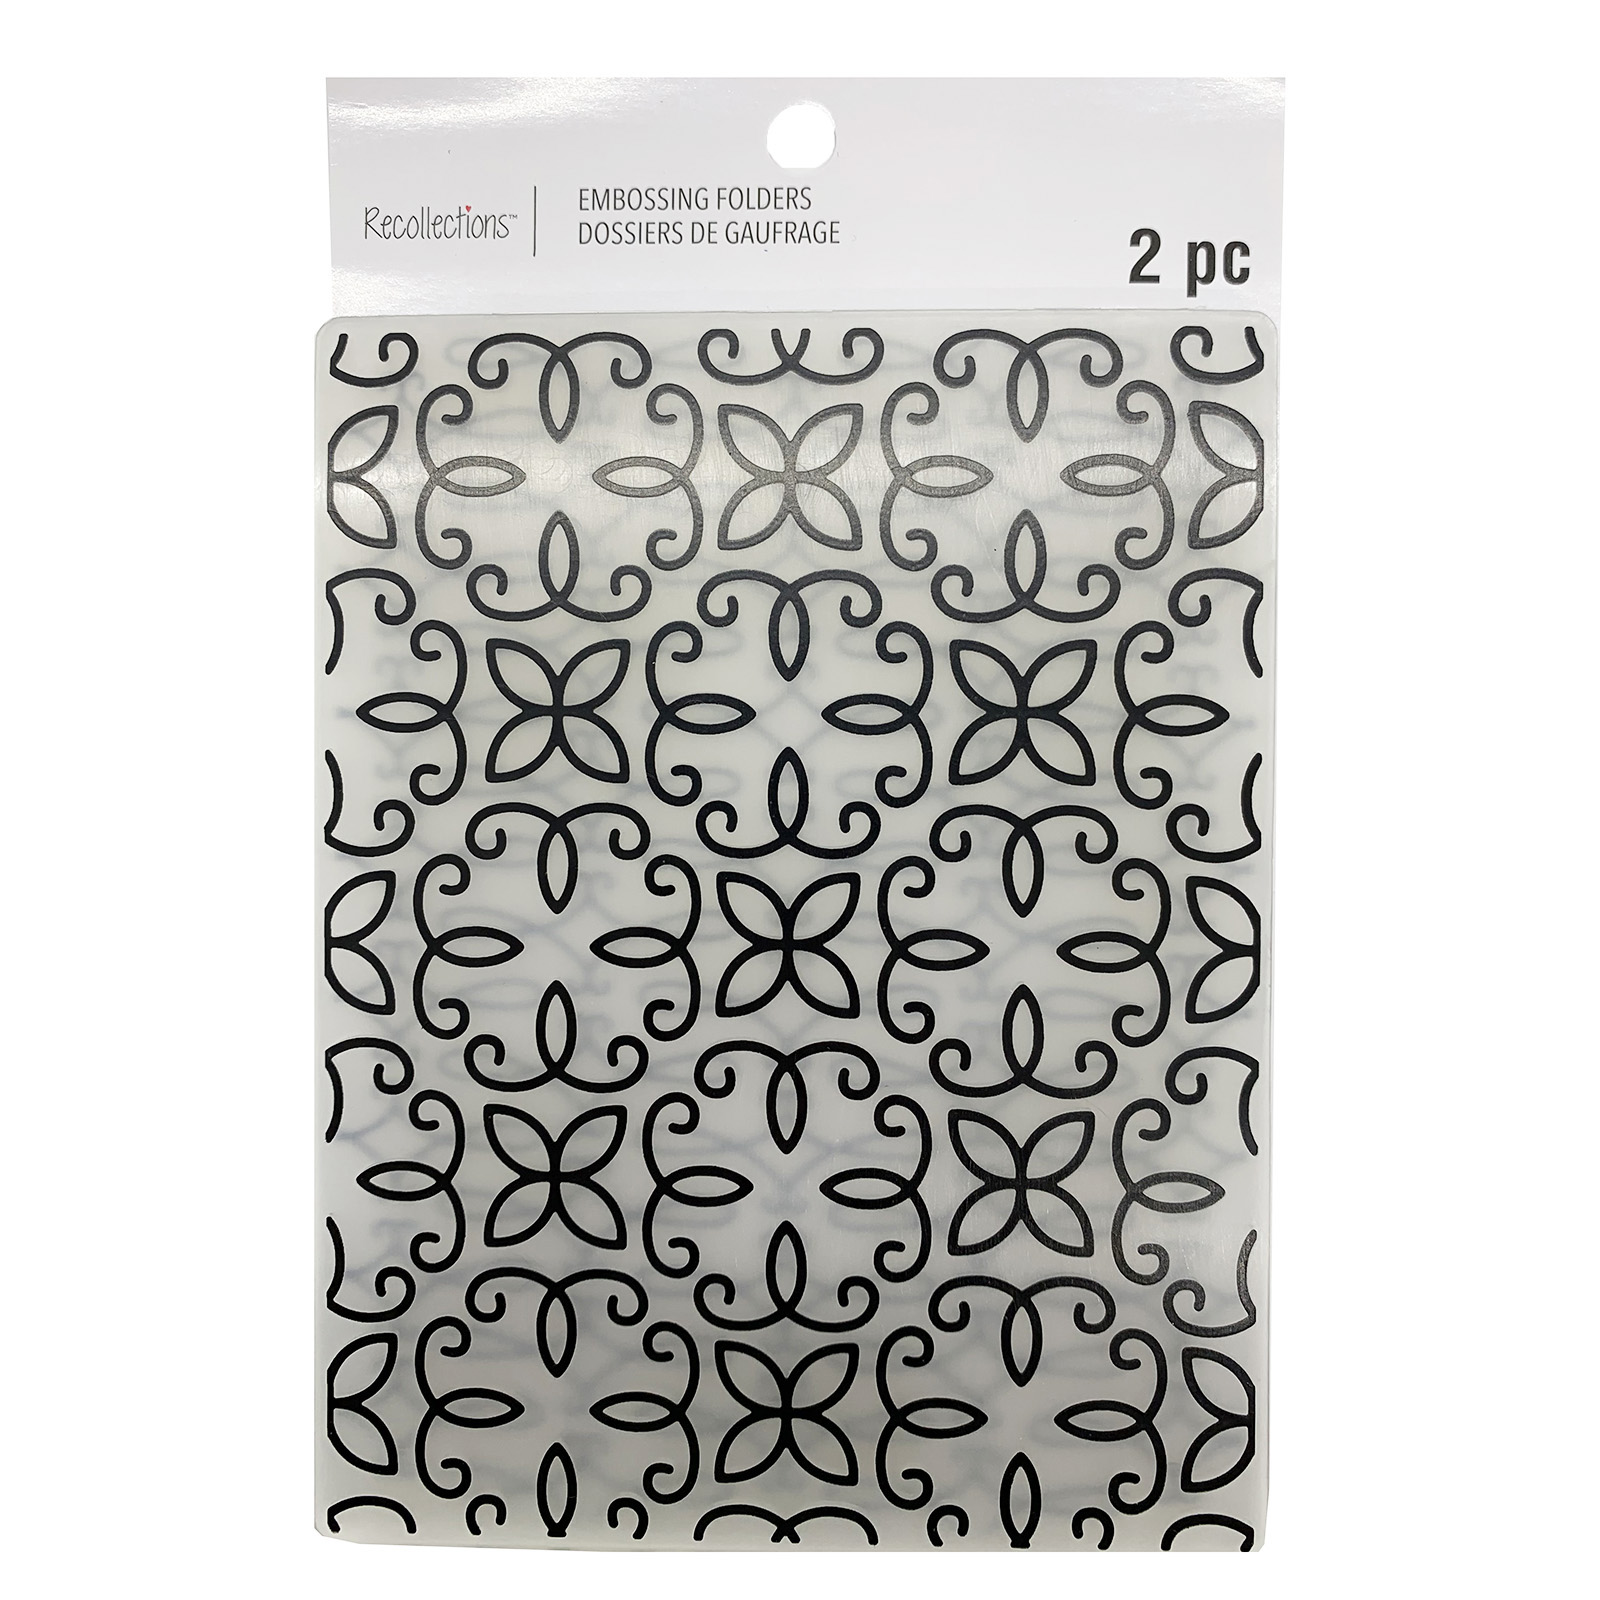 Recollections Elegance Embossing Folder - 2 ct